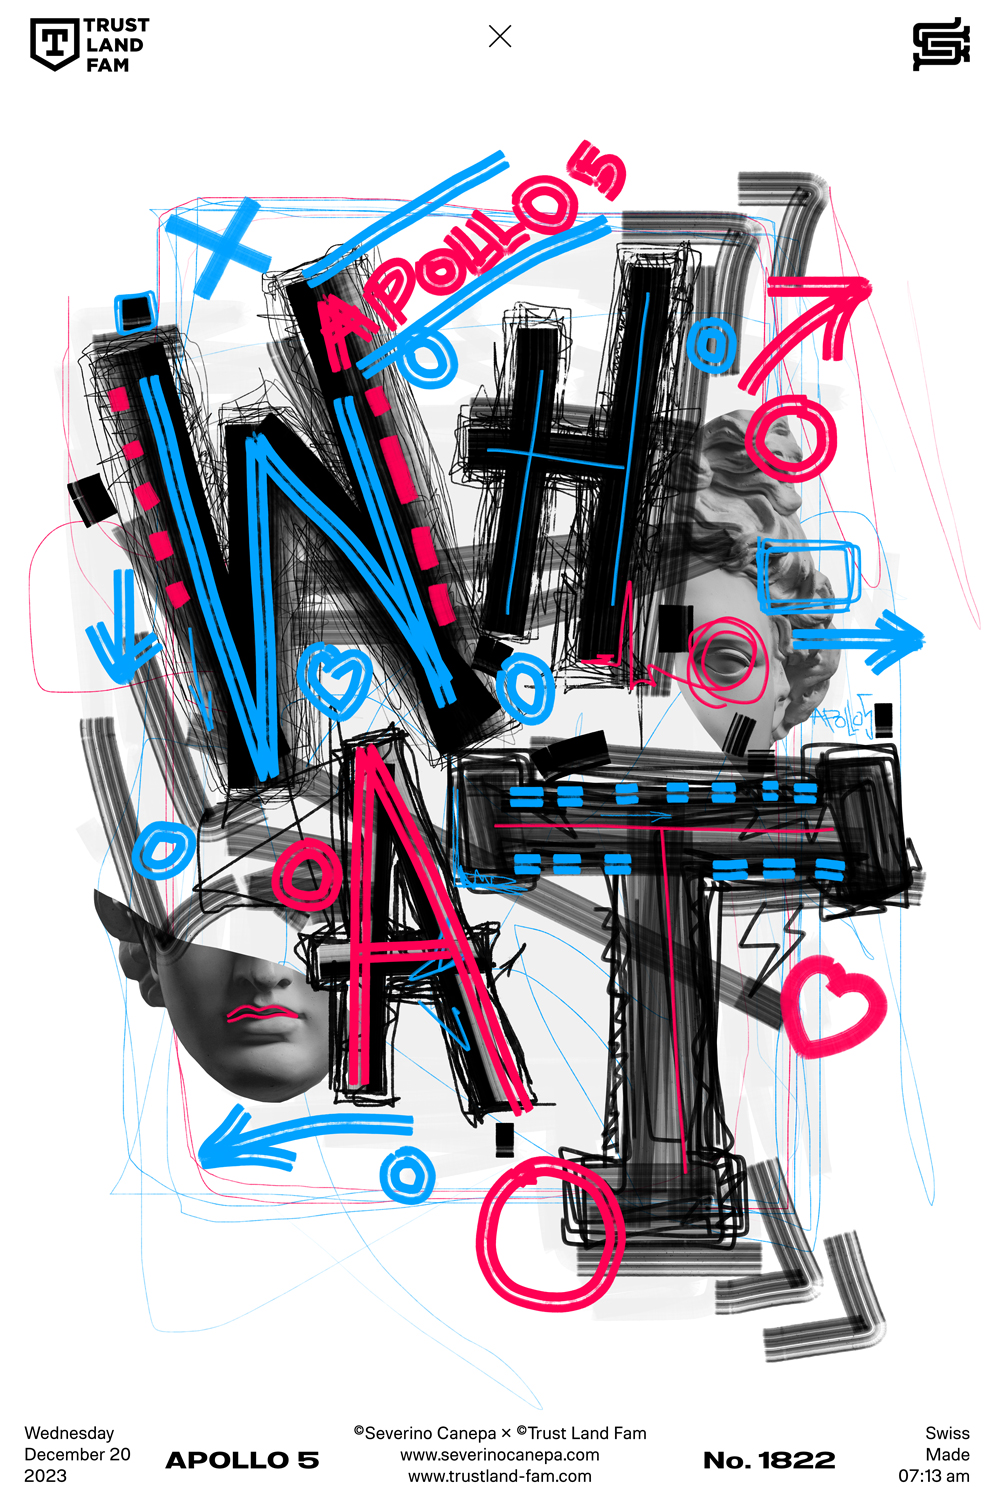 Digital creation made with Apollo's statue and hand-lettering typography made of marker brushes